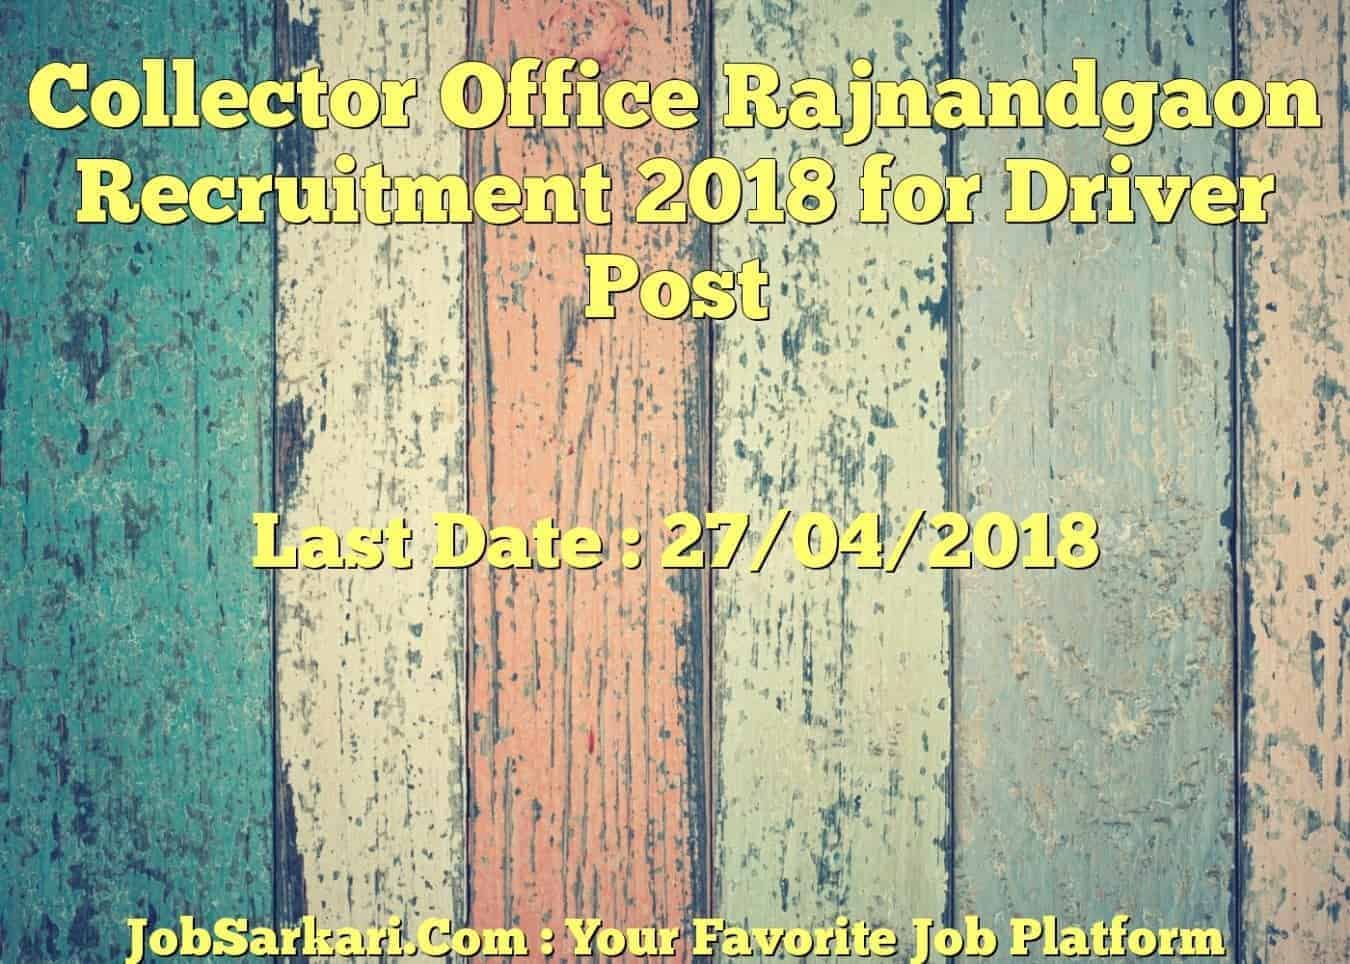 Collector Office Rajnandgaon Recruitment 2018 for Driver Post